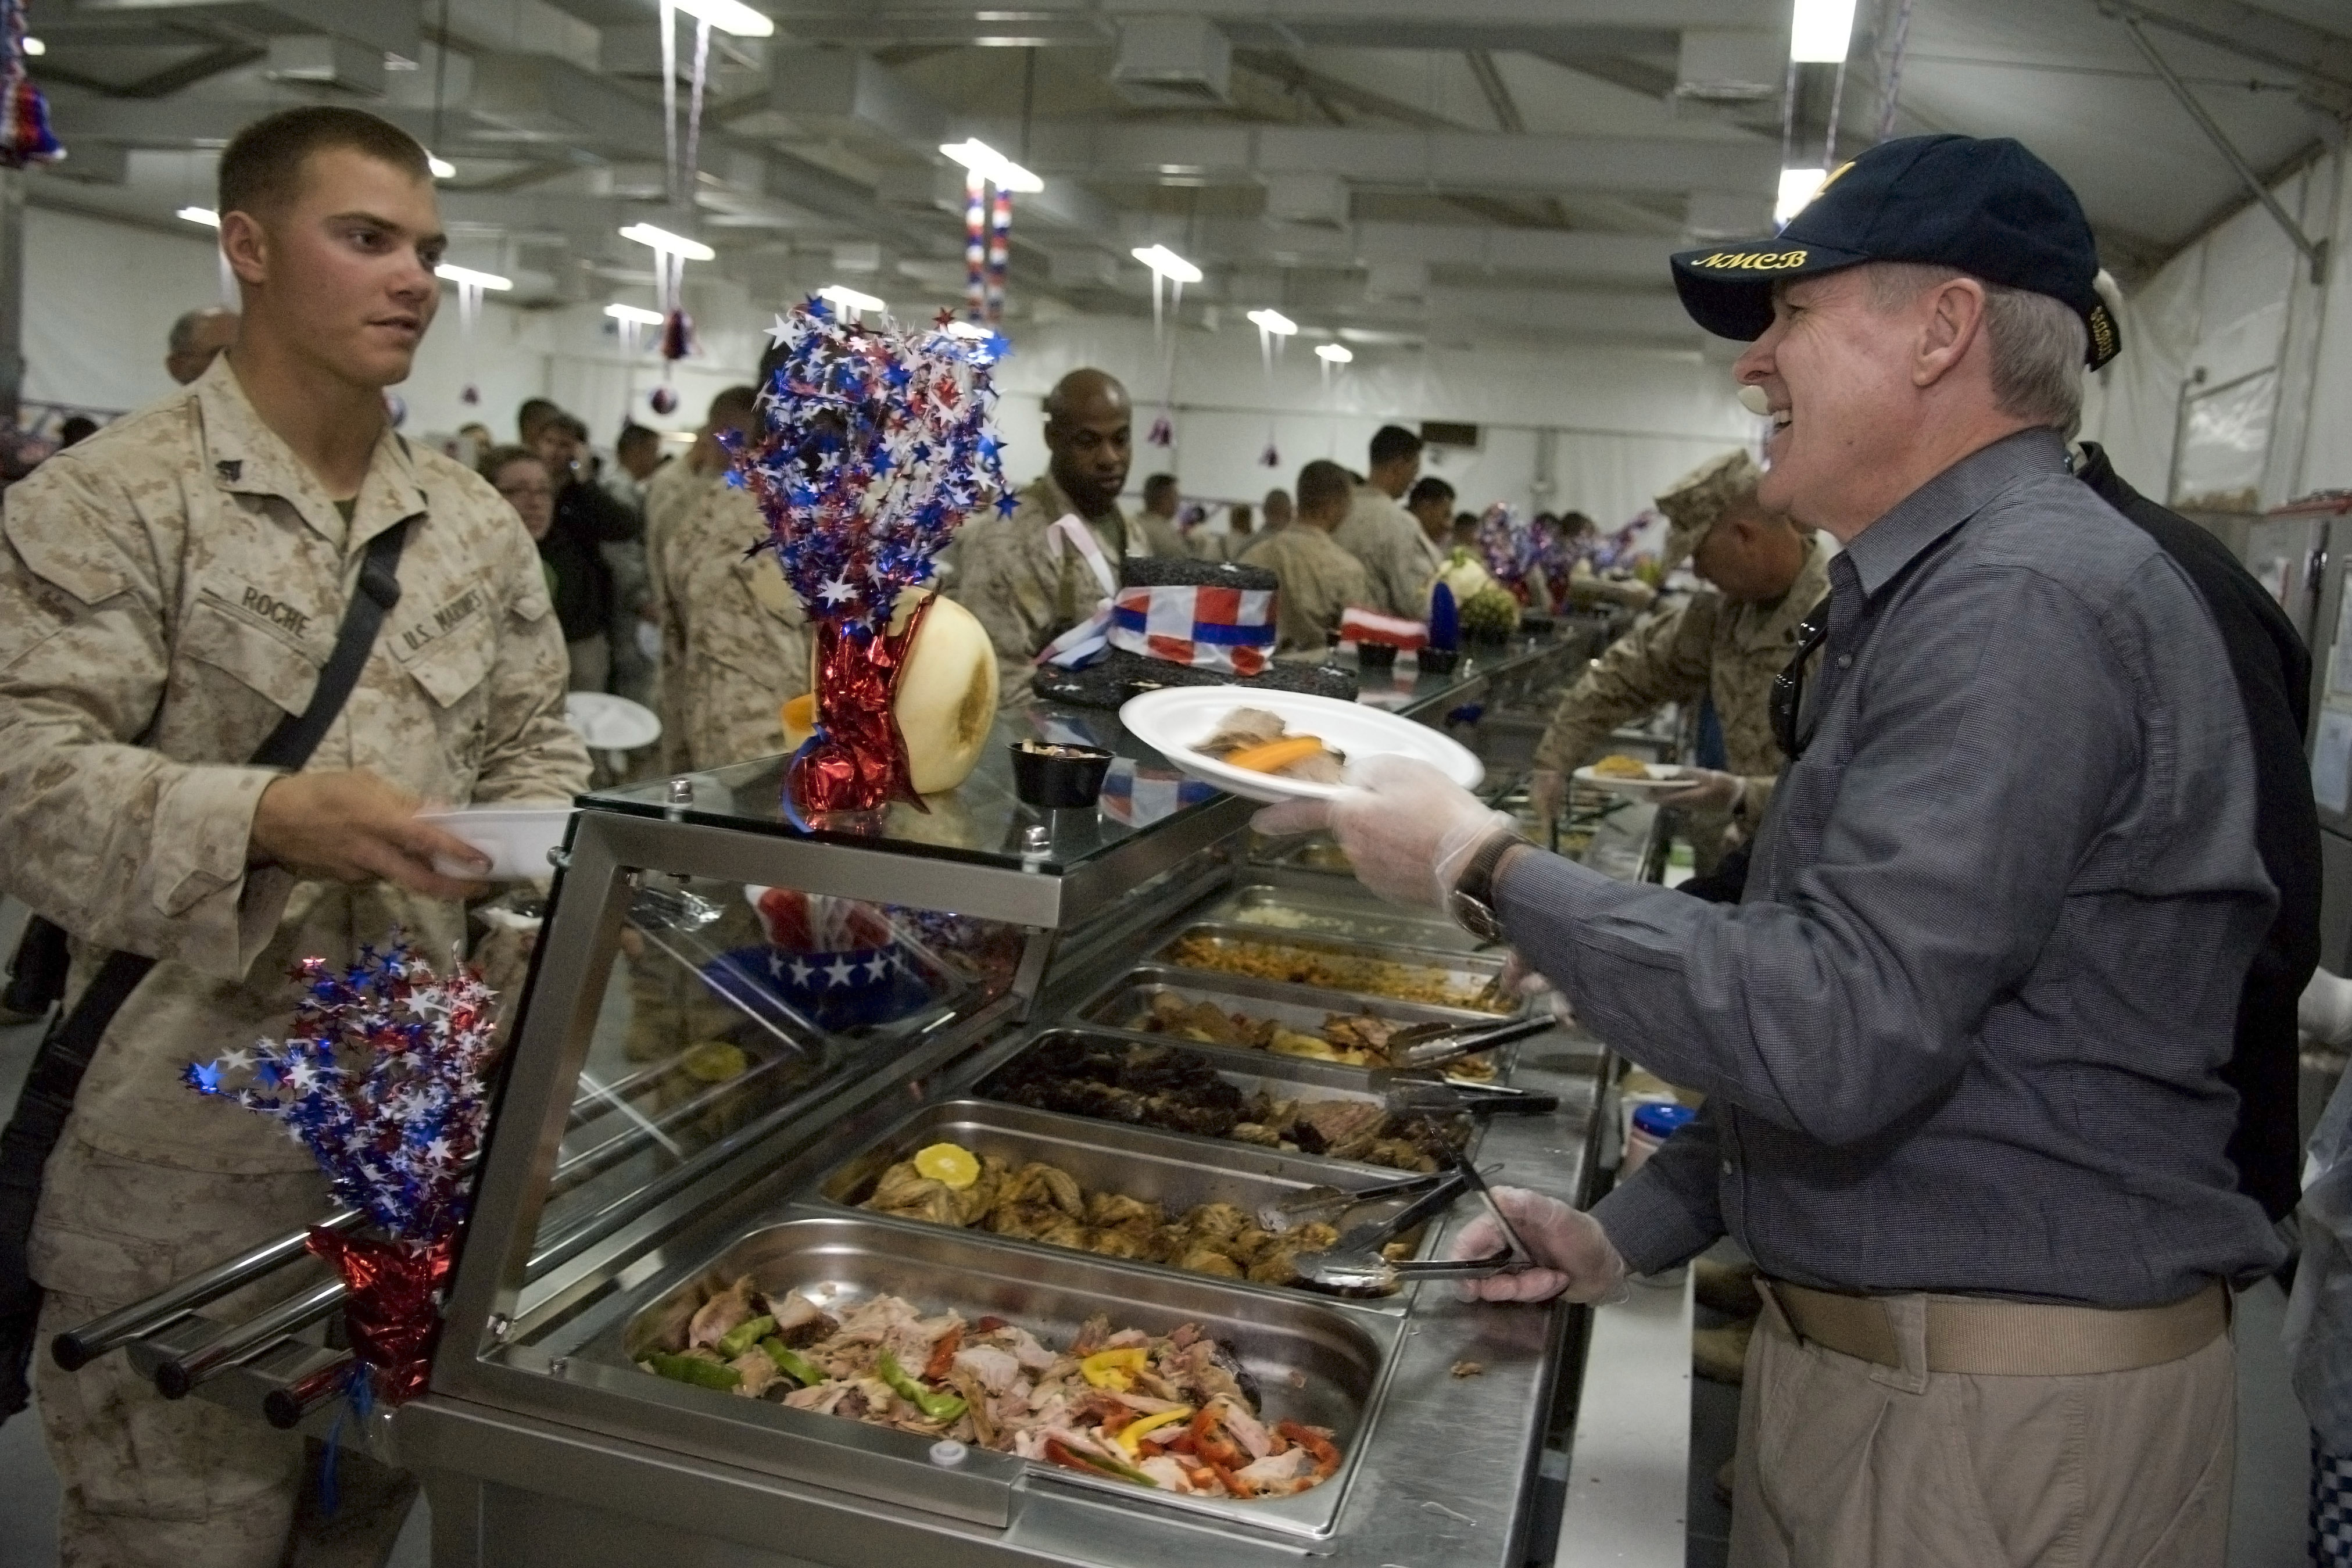 US Navy 091126-N-5549O-194 Secretary of the Navy the Honorable Ray Mabus serves turkey to Marines and Sailors Thanksgiving Day at Camp Leatherneck